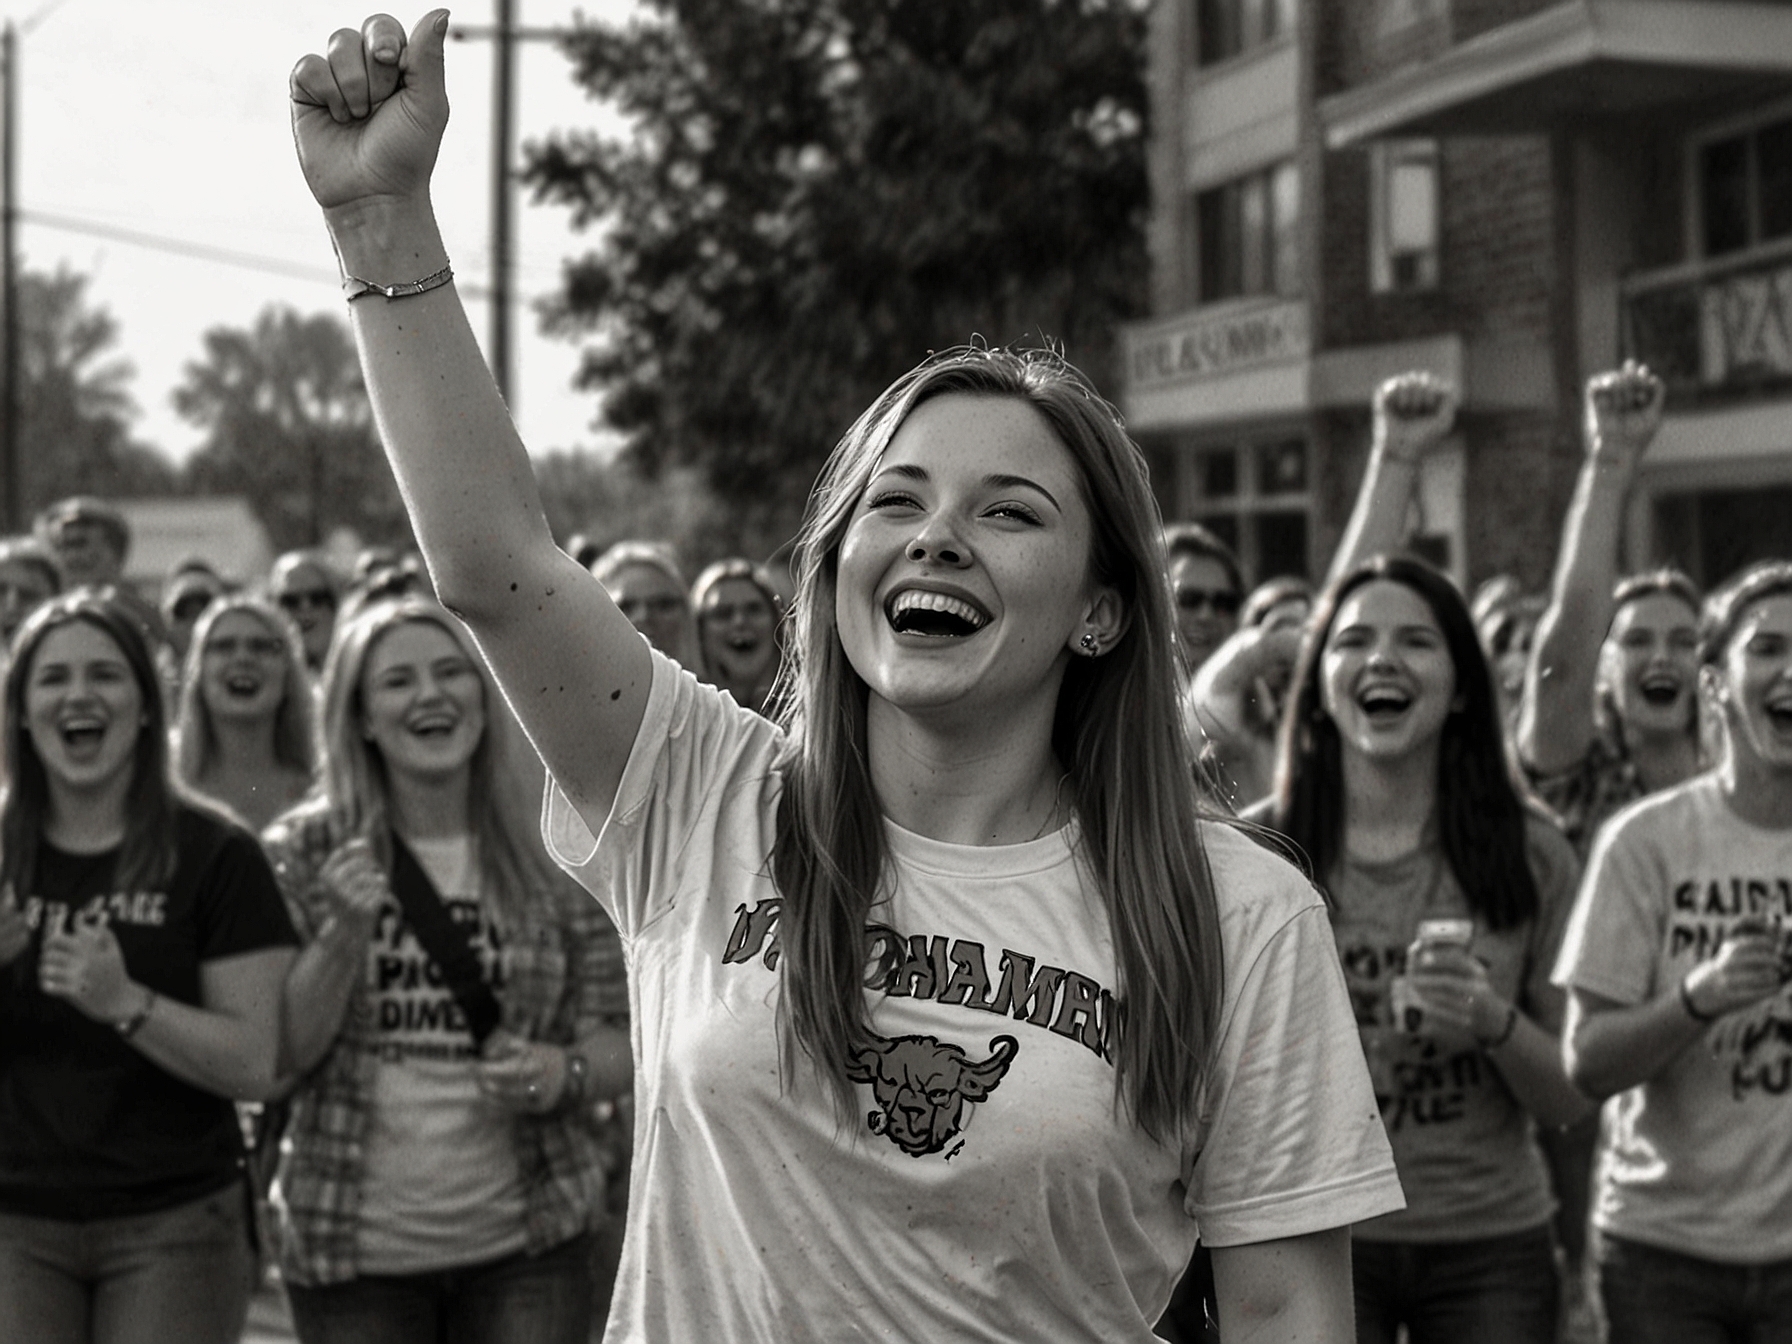 Bella Cothern being cheered by her community in Jonesboro. The image captures the support and excitement from her hometown, signifying the strong backing she has from friends, family, and local supporters.